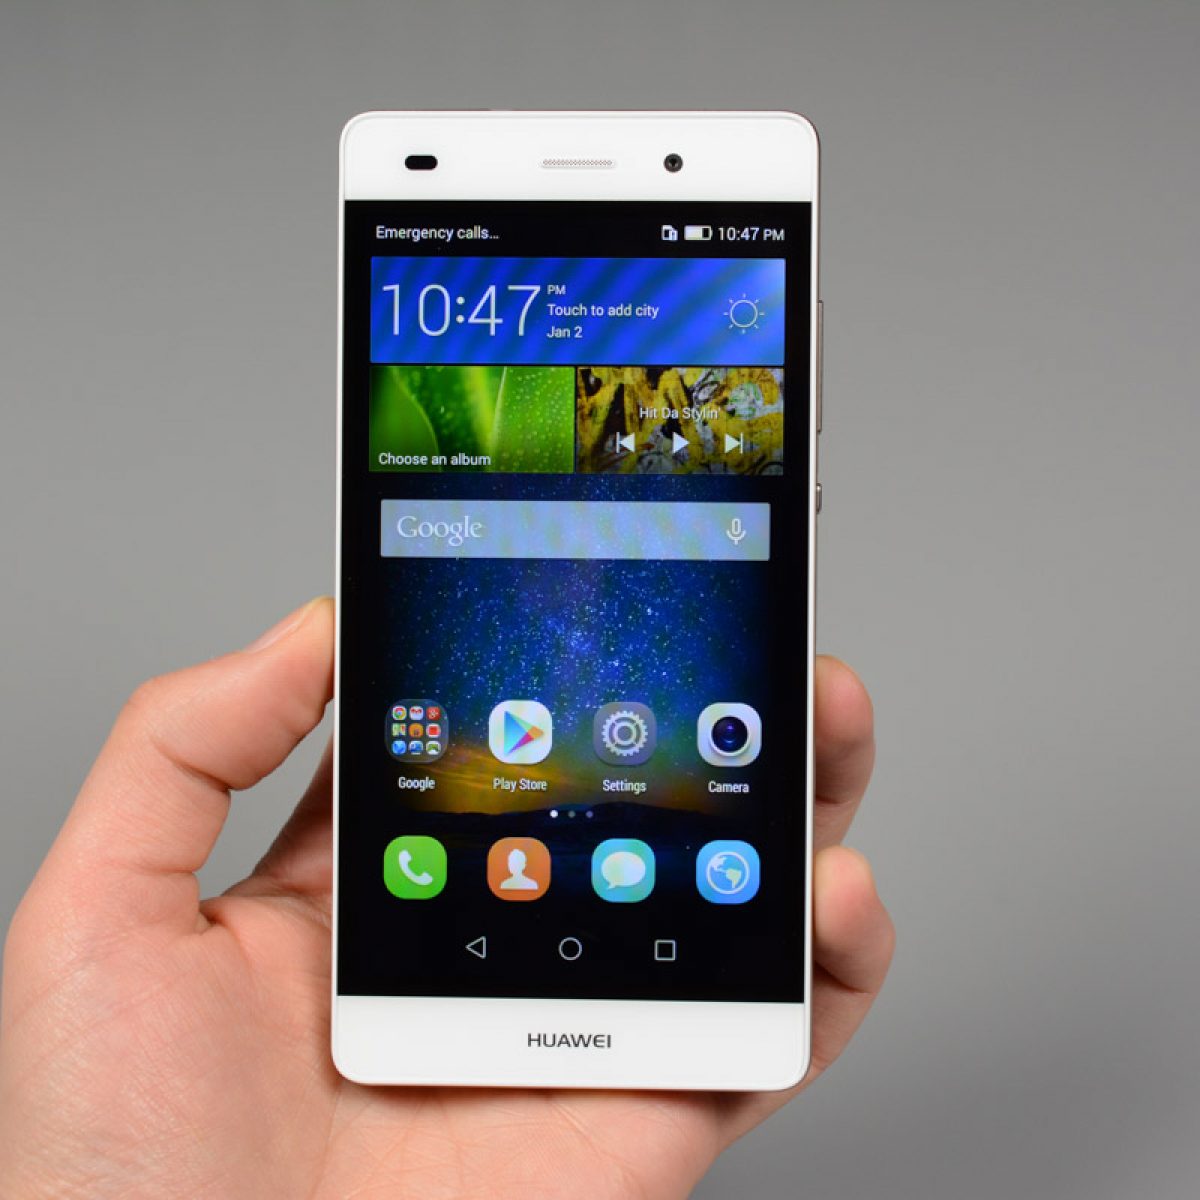 effectief Kantine vorst Video: Huawei P8 Lite Unboxing and First Impressions